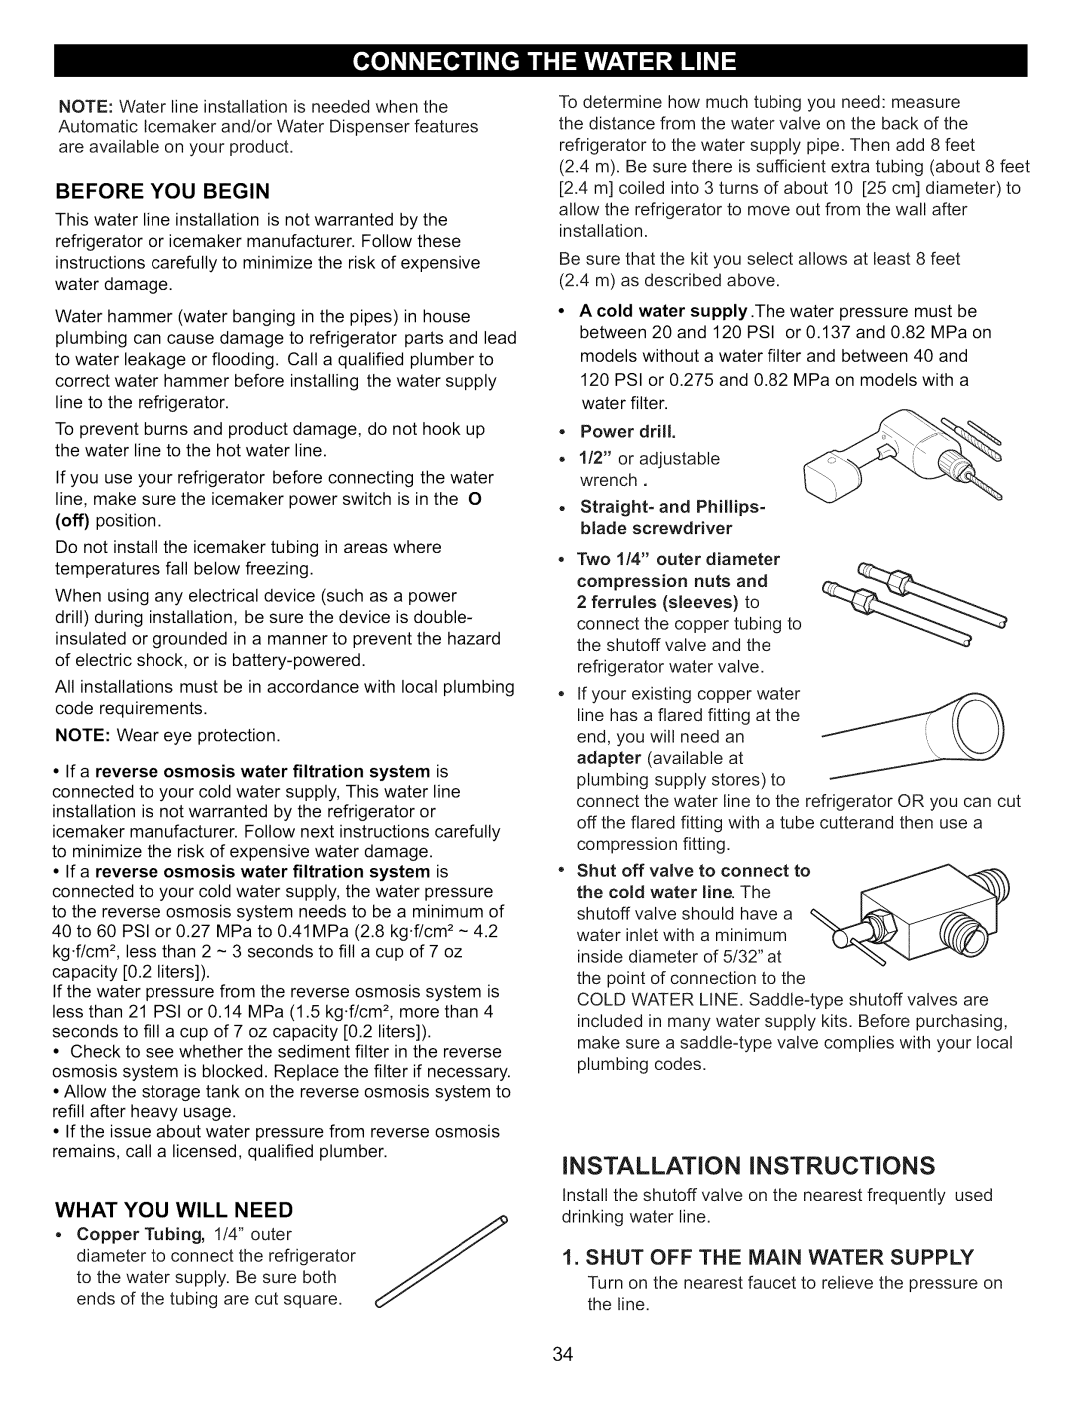 Kenmore 795.7809, 795.7900 Installation Instructions, Before You Begin, What You Will Need, Shut Off The Main Water Supply 